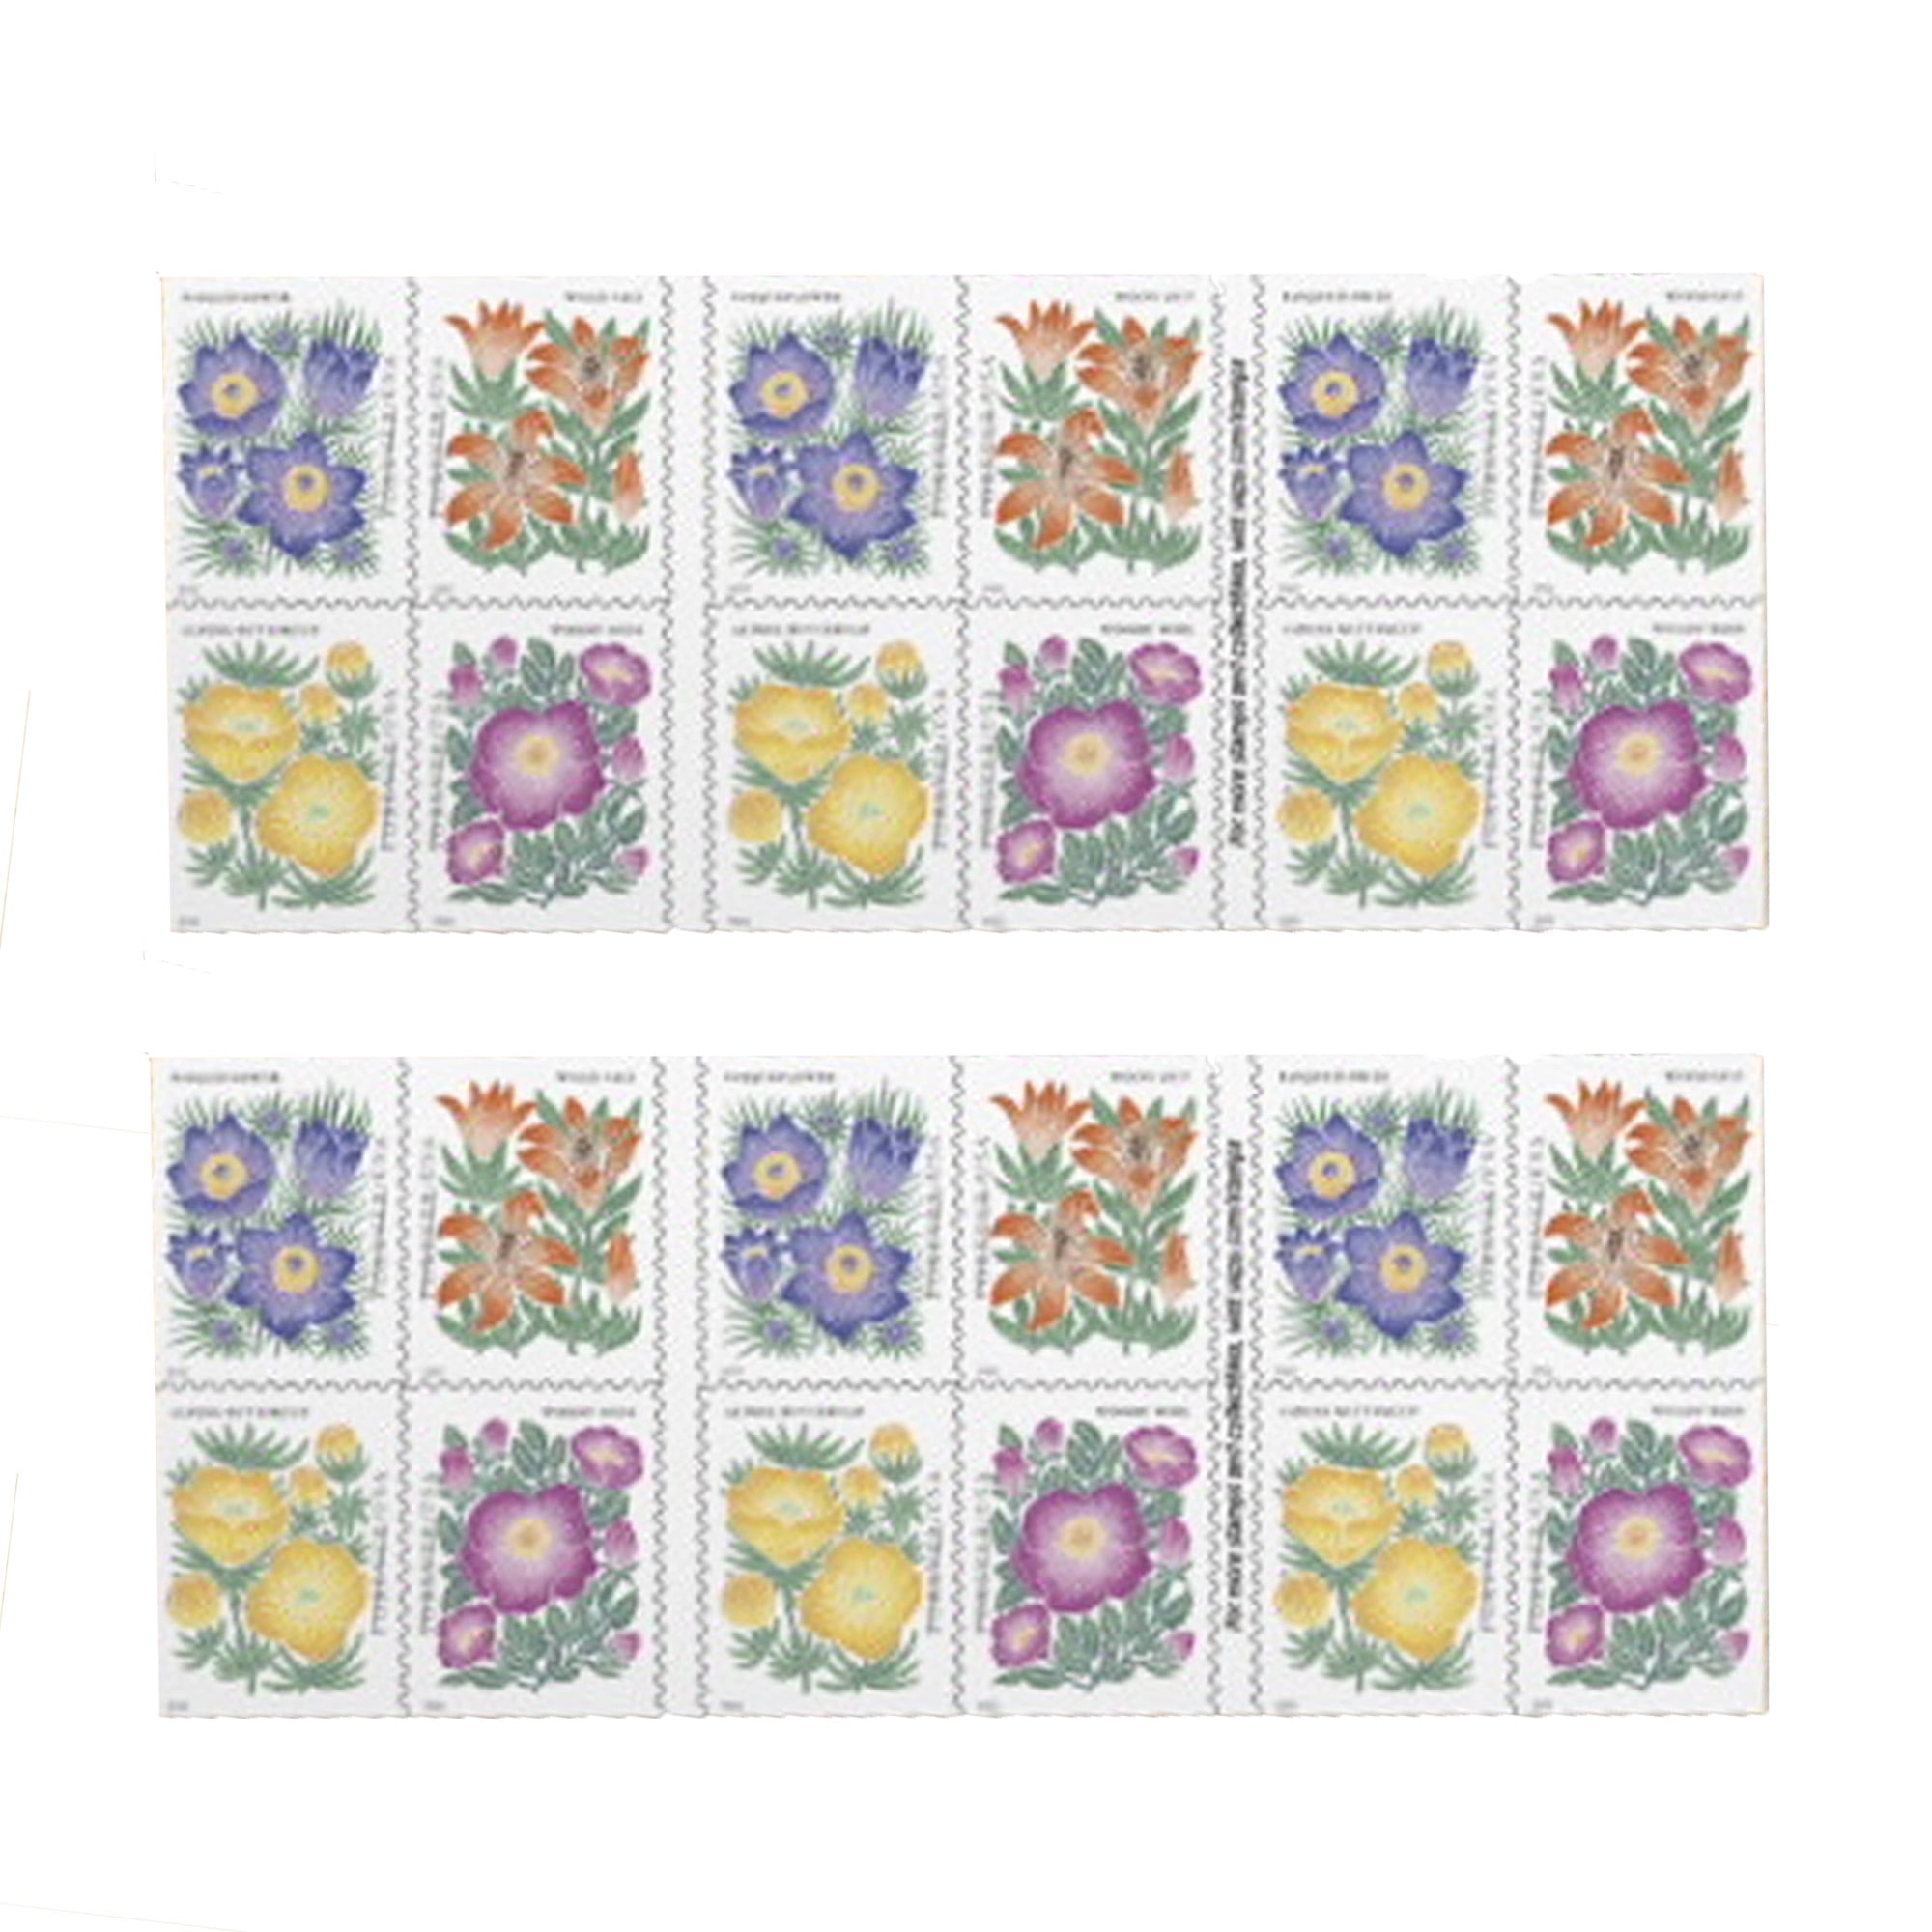 USPS Love Stamps 2 Sheets of 20 US Postal First Class Valentine Wedding Celebration Anniversary Romance Party (40 Stamps)